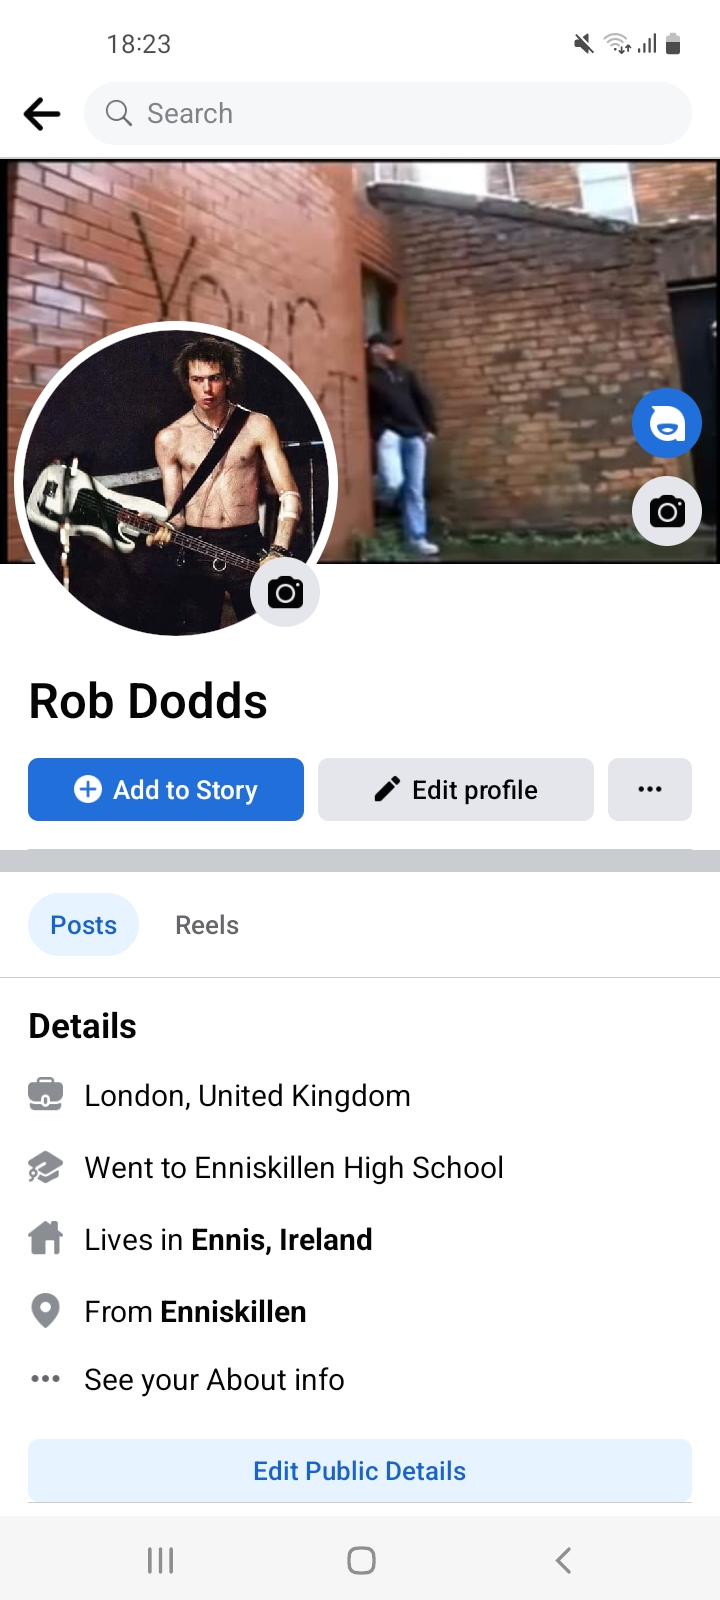 Sissy rob dodds wants to stay exposed on rhe Internet forever let’s help him out